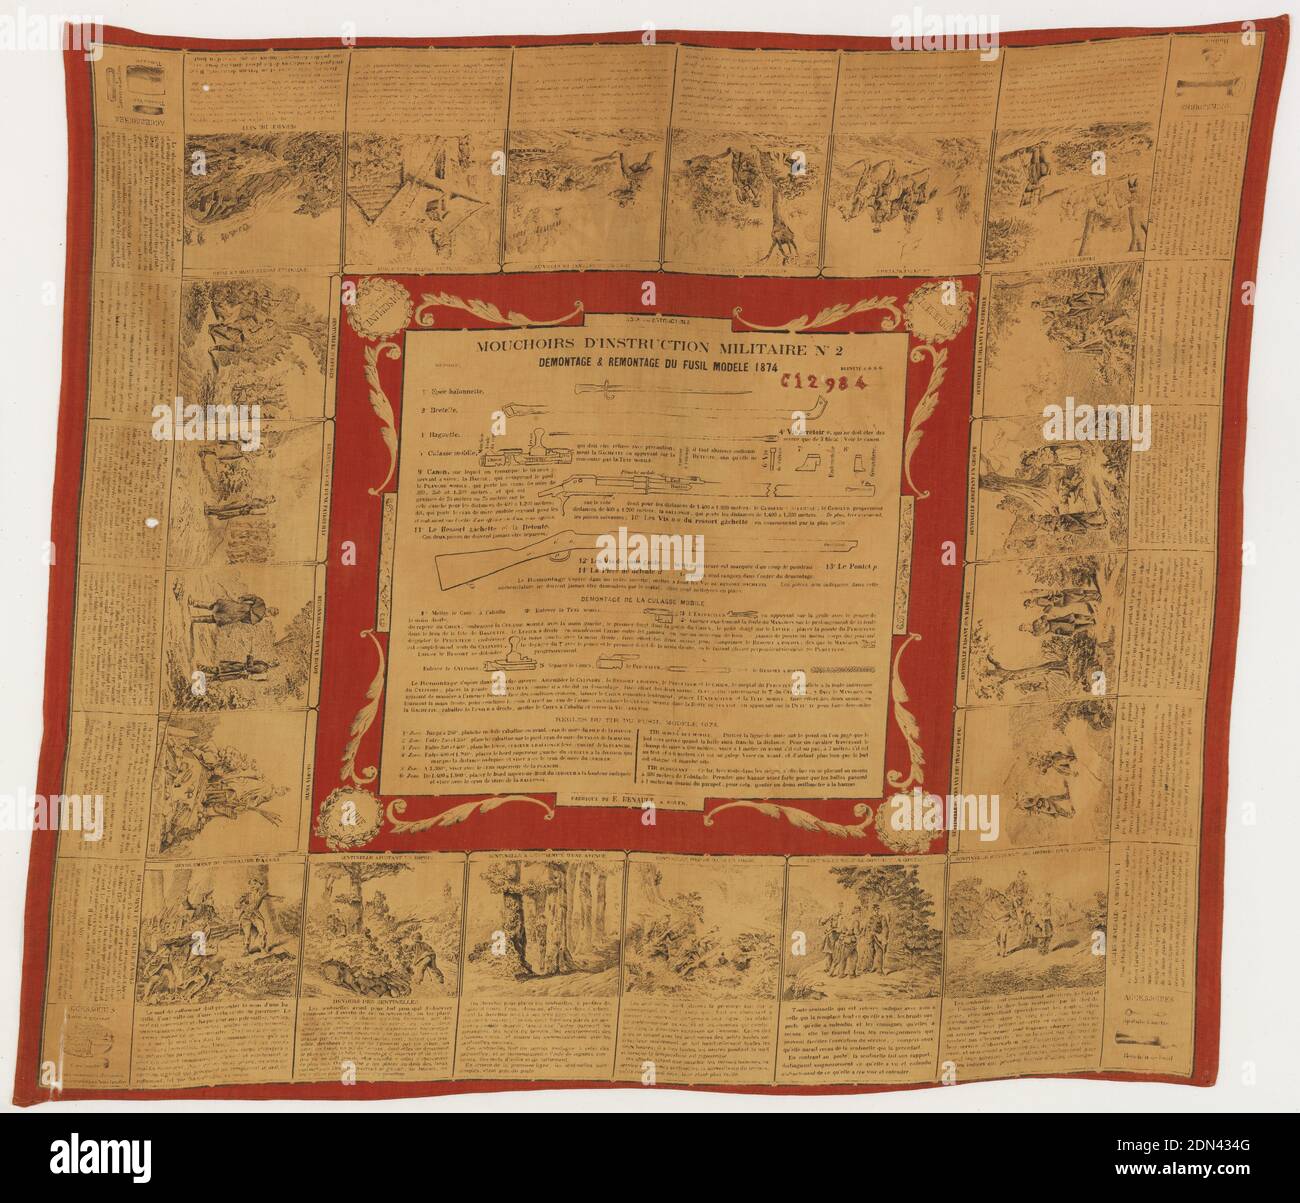 Muchoirs D’instruction Militaire, E. Renault, Medium: cotton Technique: printed on plain weave, Red cotton handkerchief printed with black design on cream ground showing military activities. At center are instructions on instruction on the stripping and assembly of the 1886M93 Lebel rifle. Printed at top: Muchoirs D’instruction Militaire (military training handkerchief)., Rouen, France, 1874, printed, dyed & painted textiles, Handkerchief, Handkerchief Stock Photo